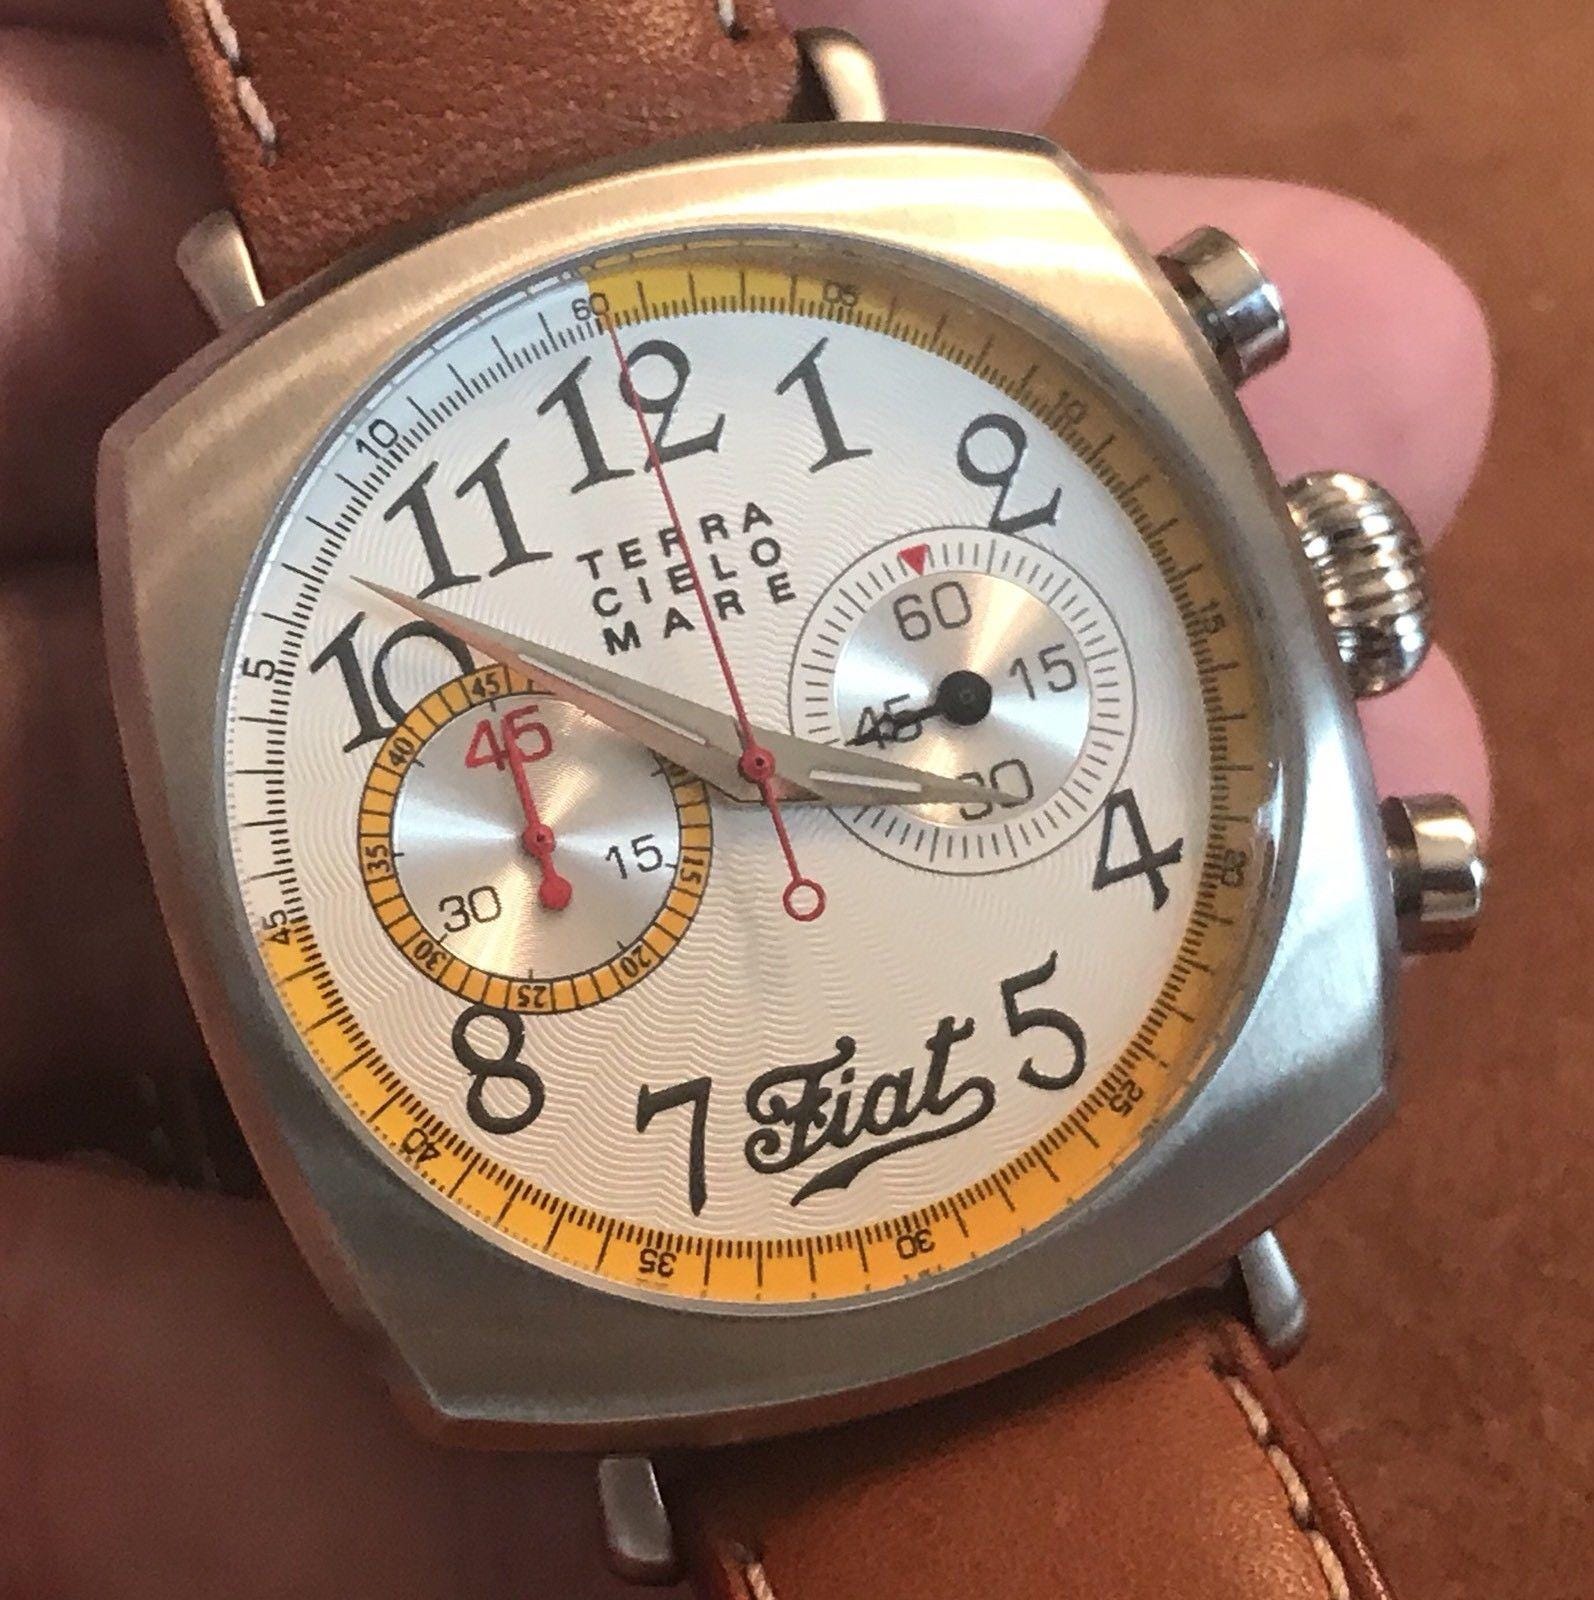 This Terra Cielo Mare watch given to former UAW official General Holiefield was worth several thousand dollars and included the Fiat logo.